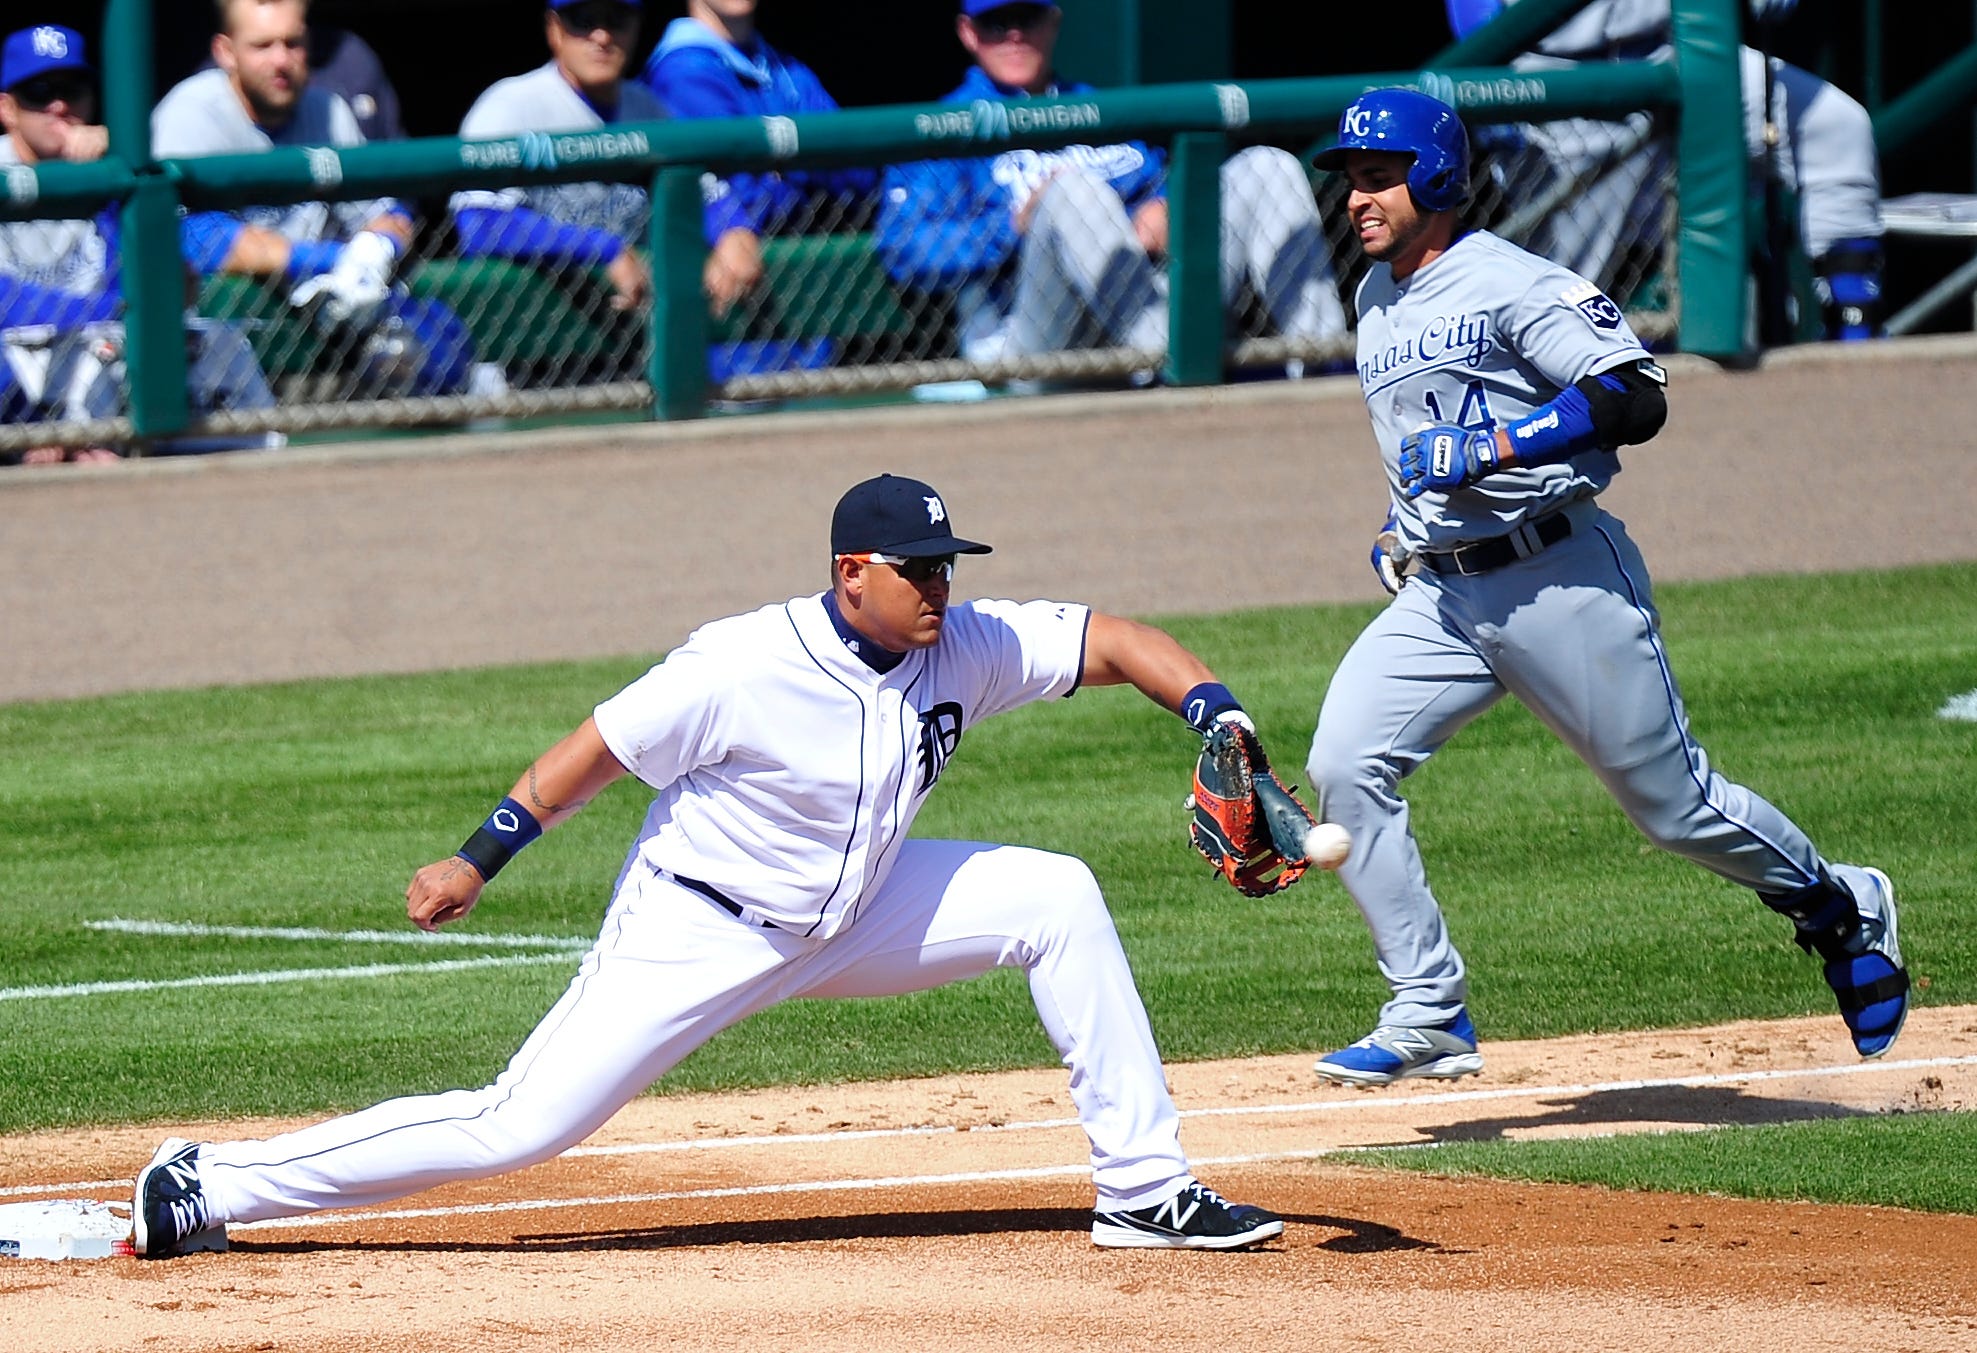 Tigers Miguel Cabrera stretches out for an out on Royals and former Tigers Omar Infante in the first inning during Tigers Opening Day vs the Kansas City Royal at Comerica Park in Detroit, Michigan on March 31, 2014.